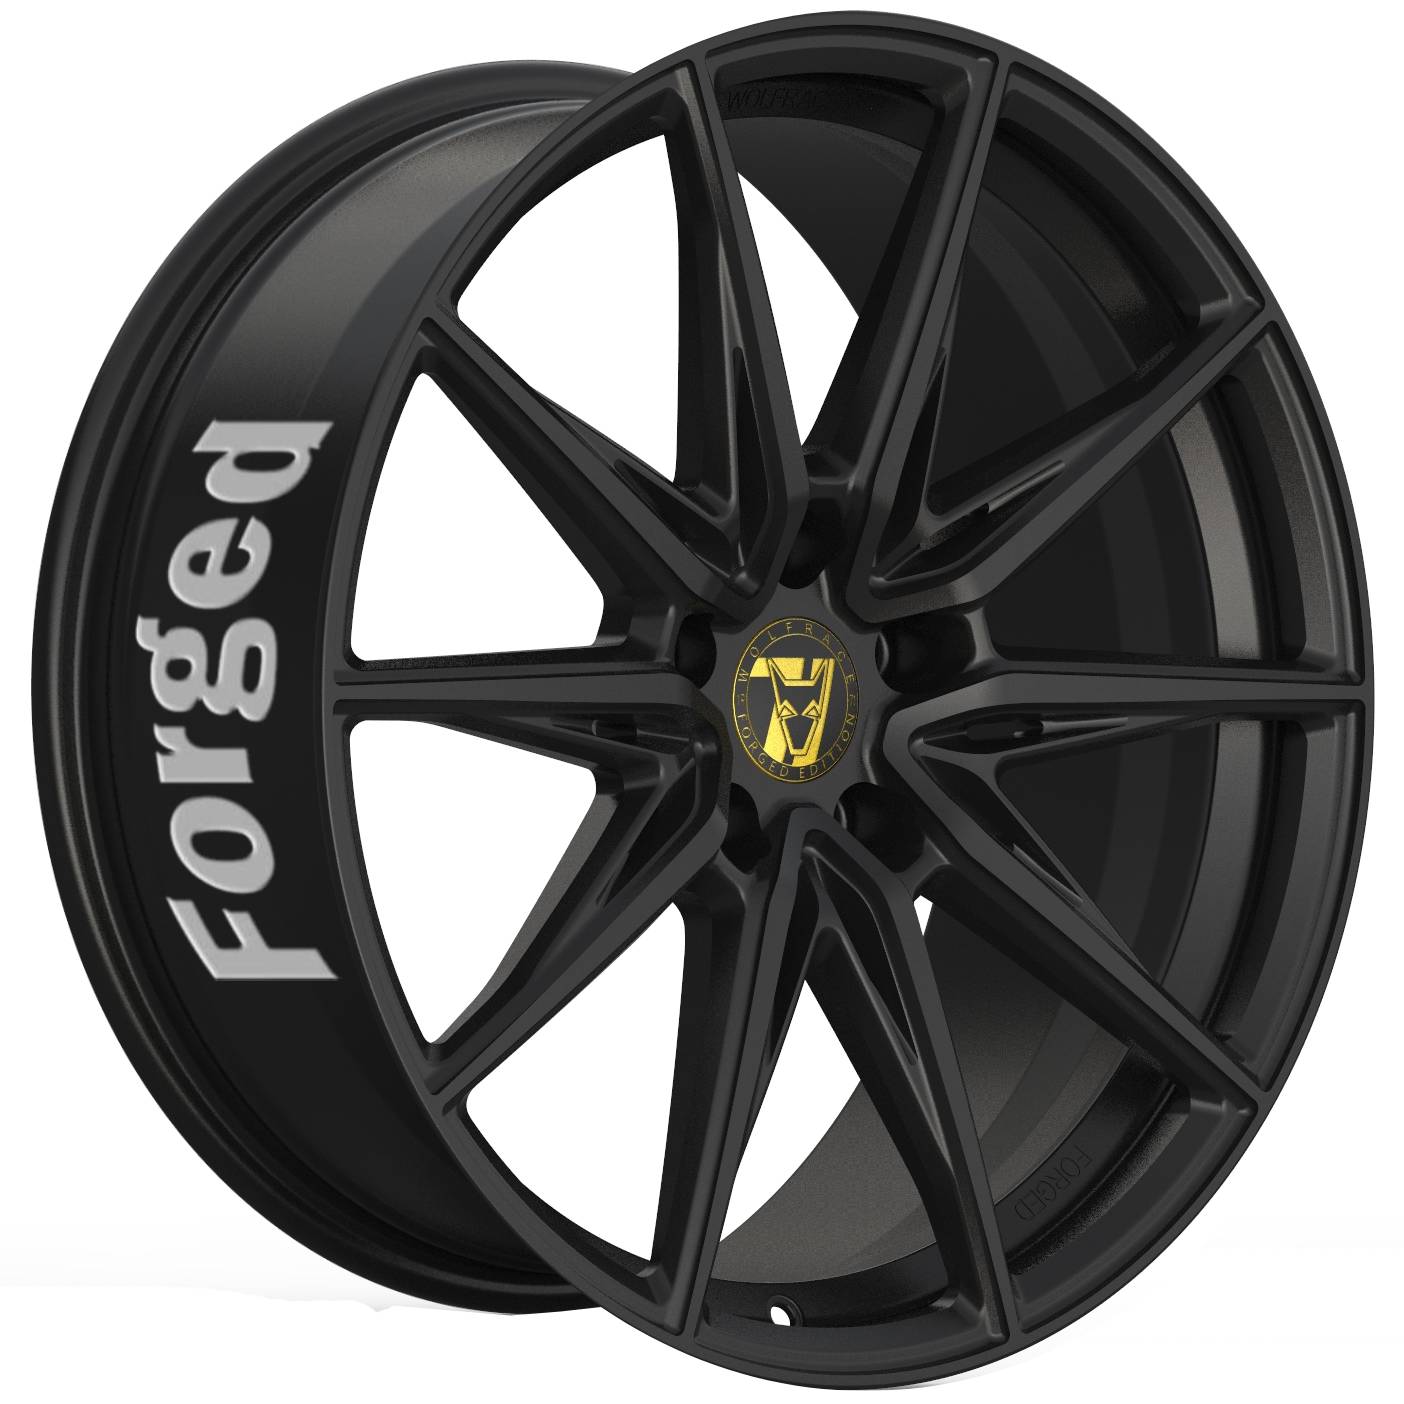 Jantes alu Demon Wheels 71 Forged Edition Urban Racer Forged [13x23] -5x108- ET 35